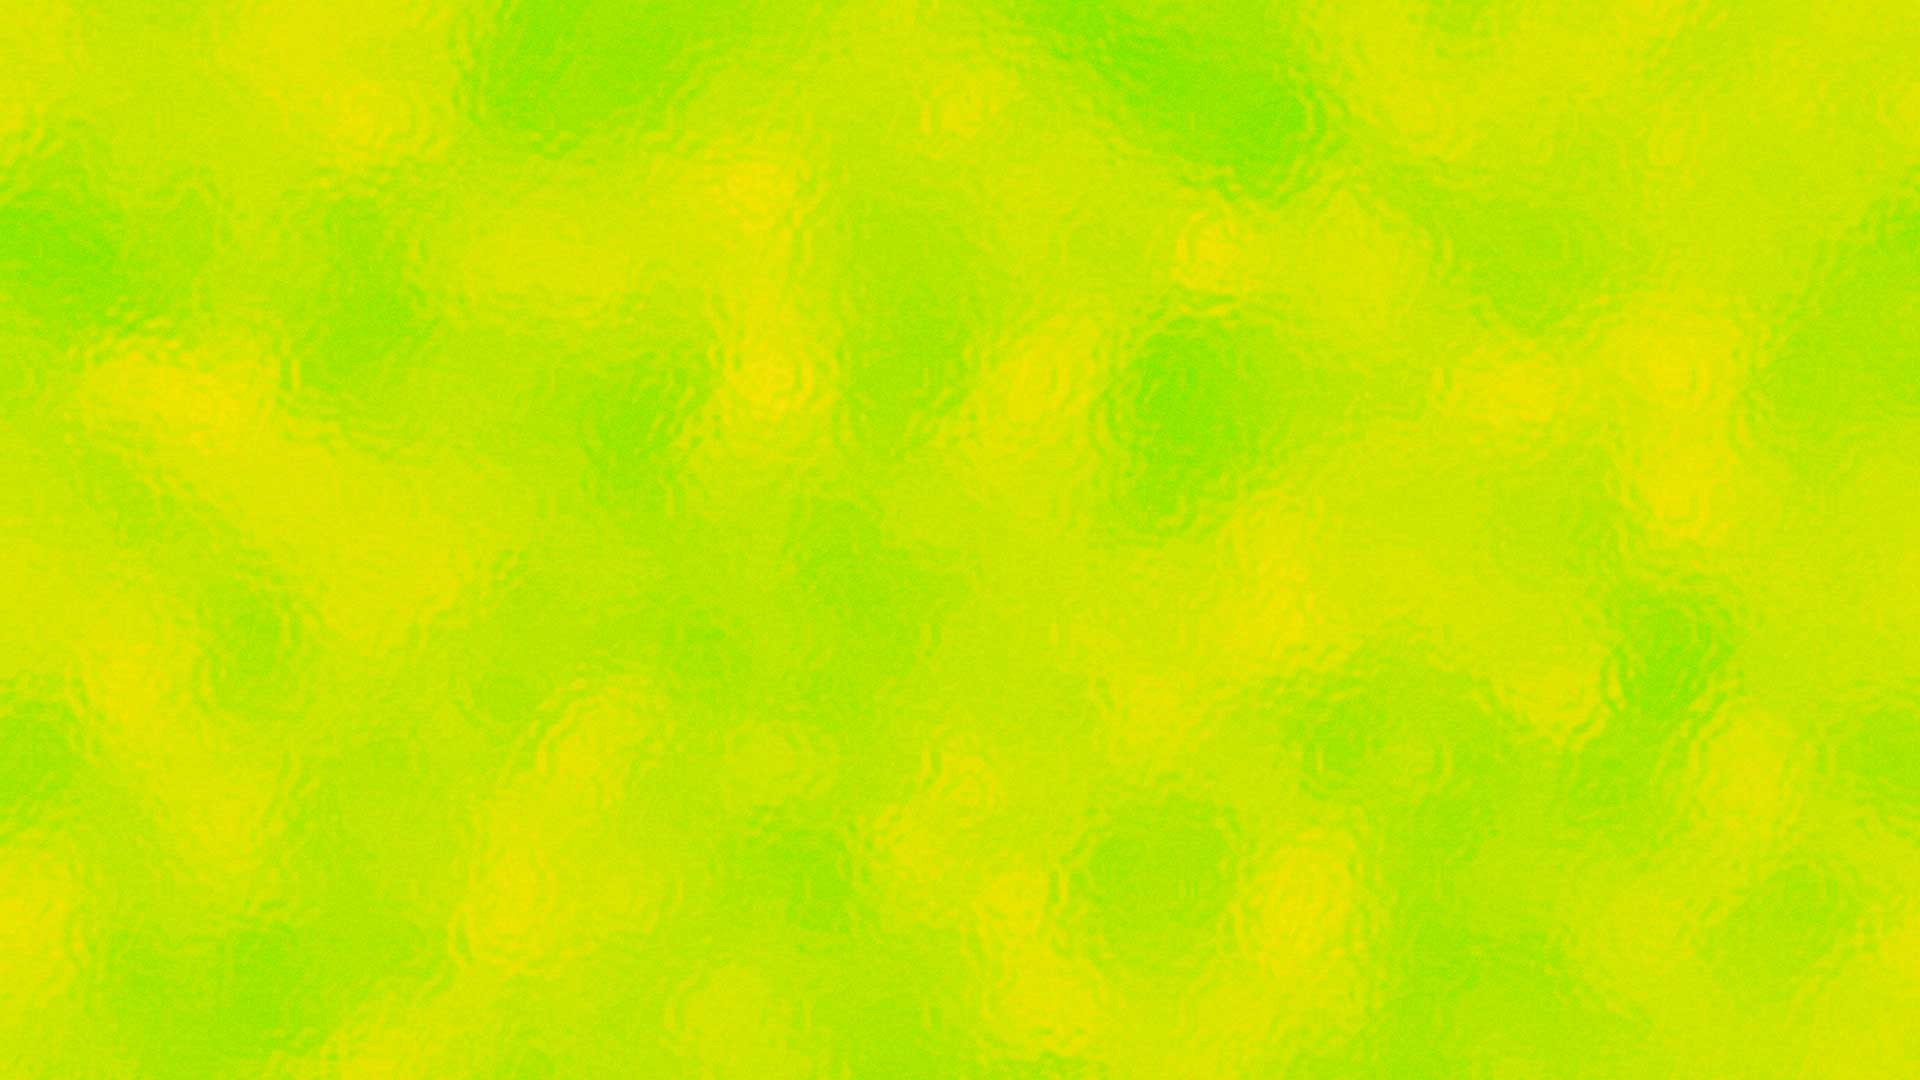 1920x1080 Yellow, Lime Green Background Image